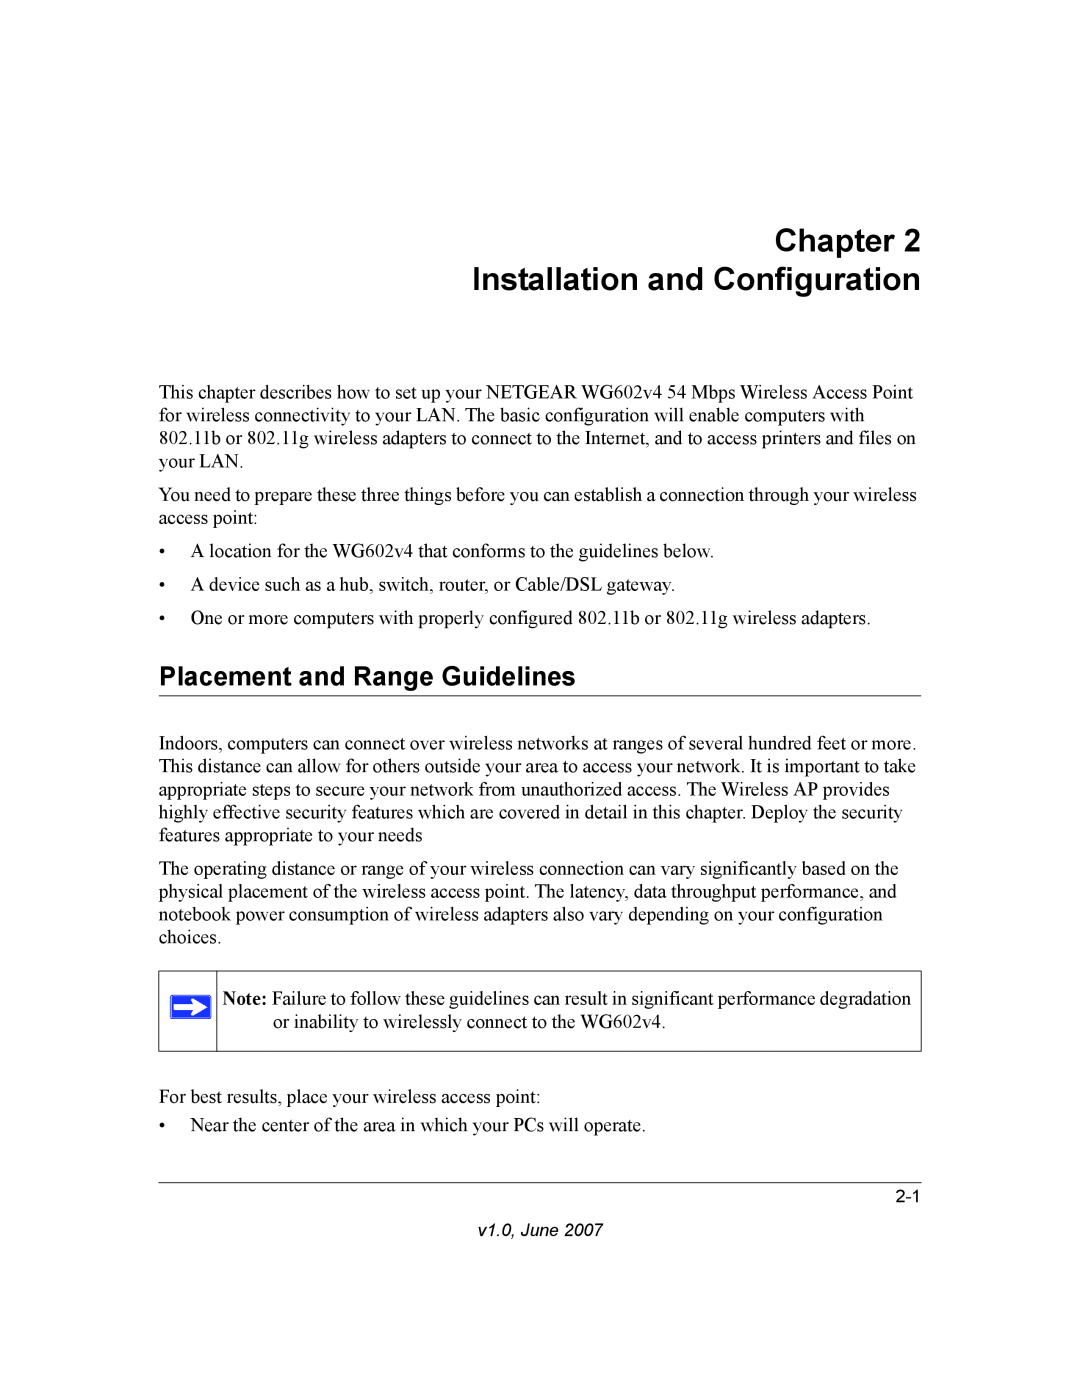 NETGEAR WG602V4 manual Chapter Installation and Configuration, Placement and Range Guidelines 